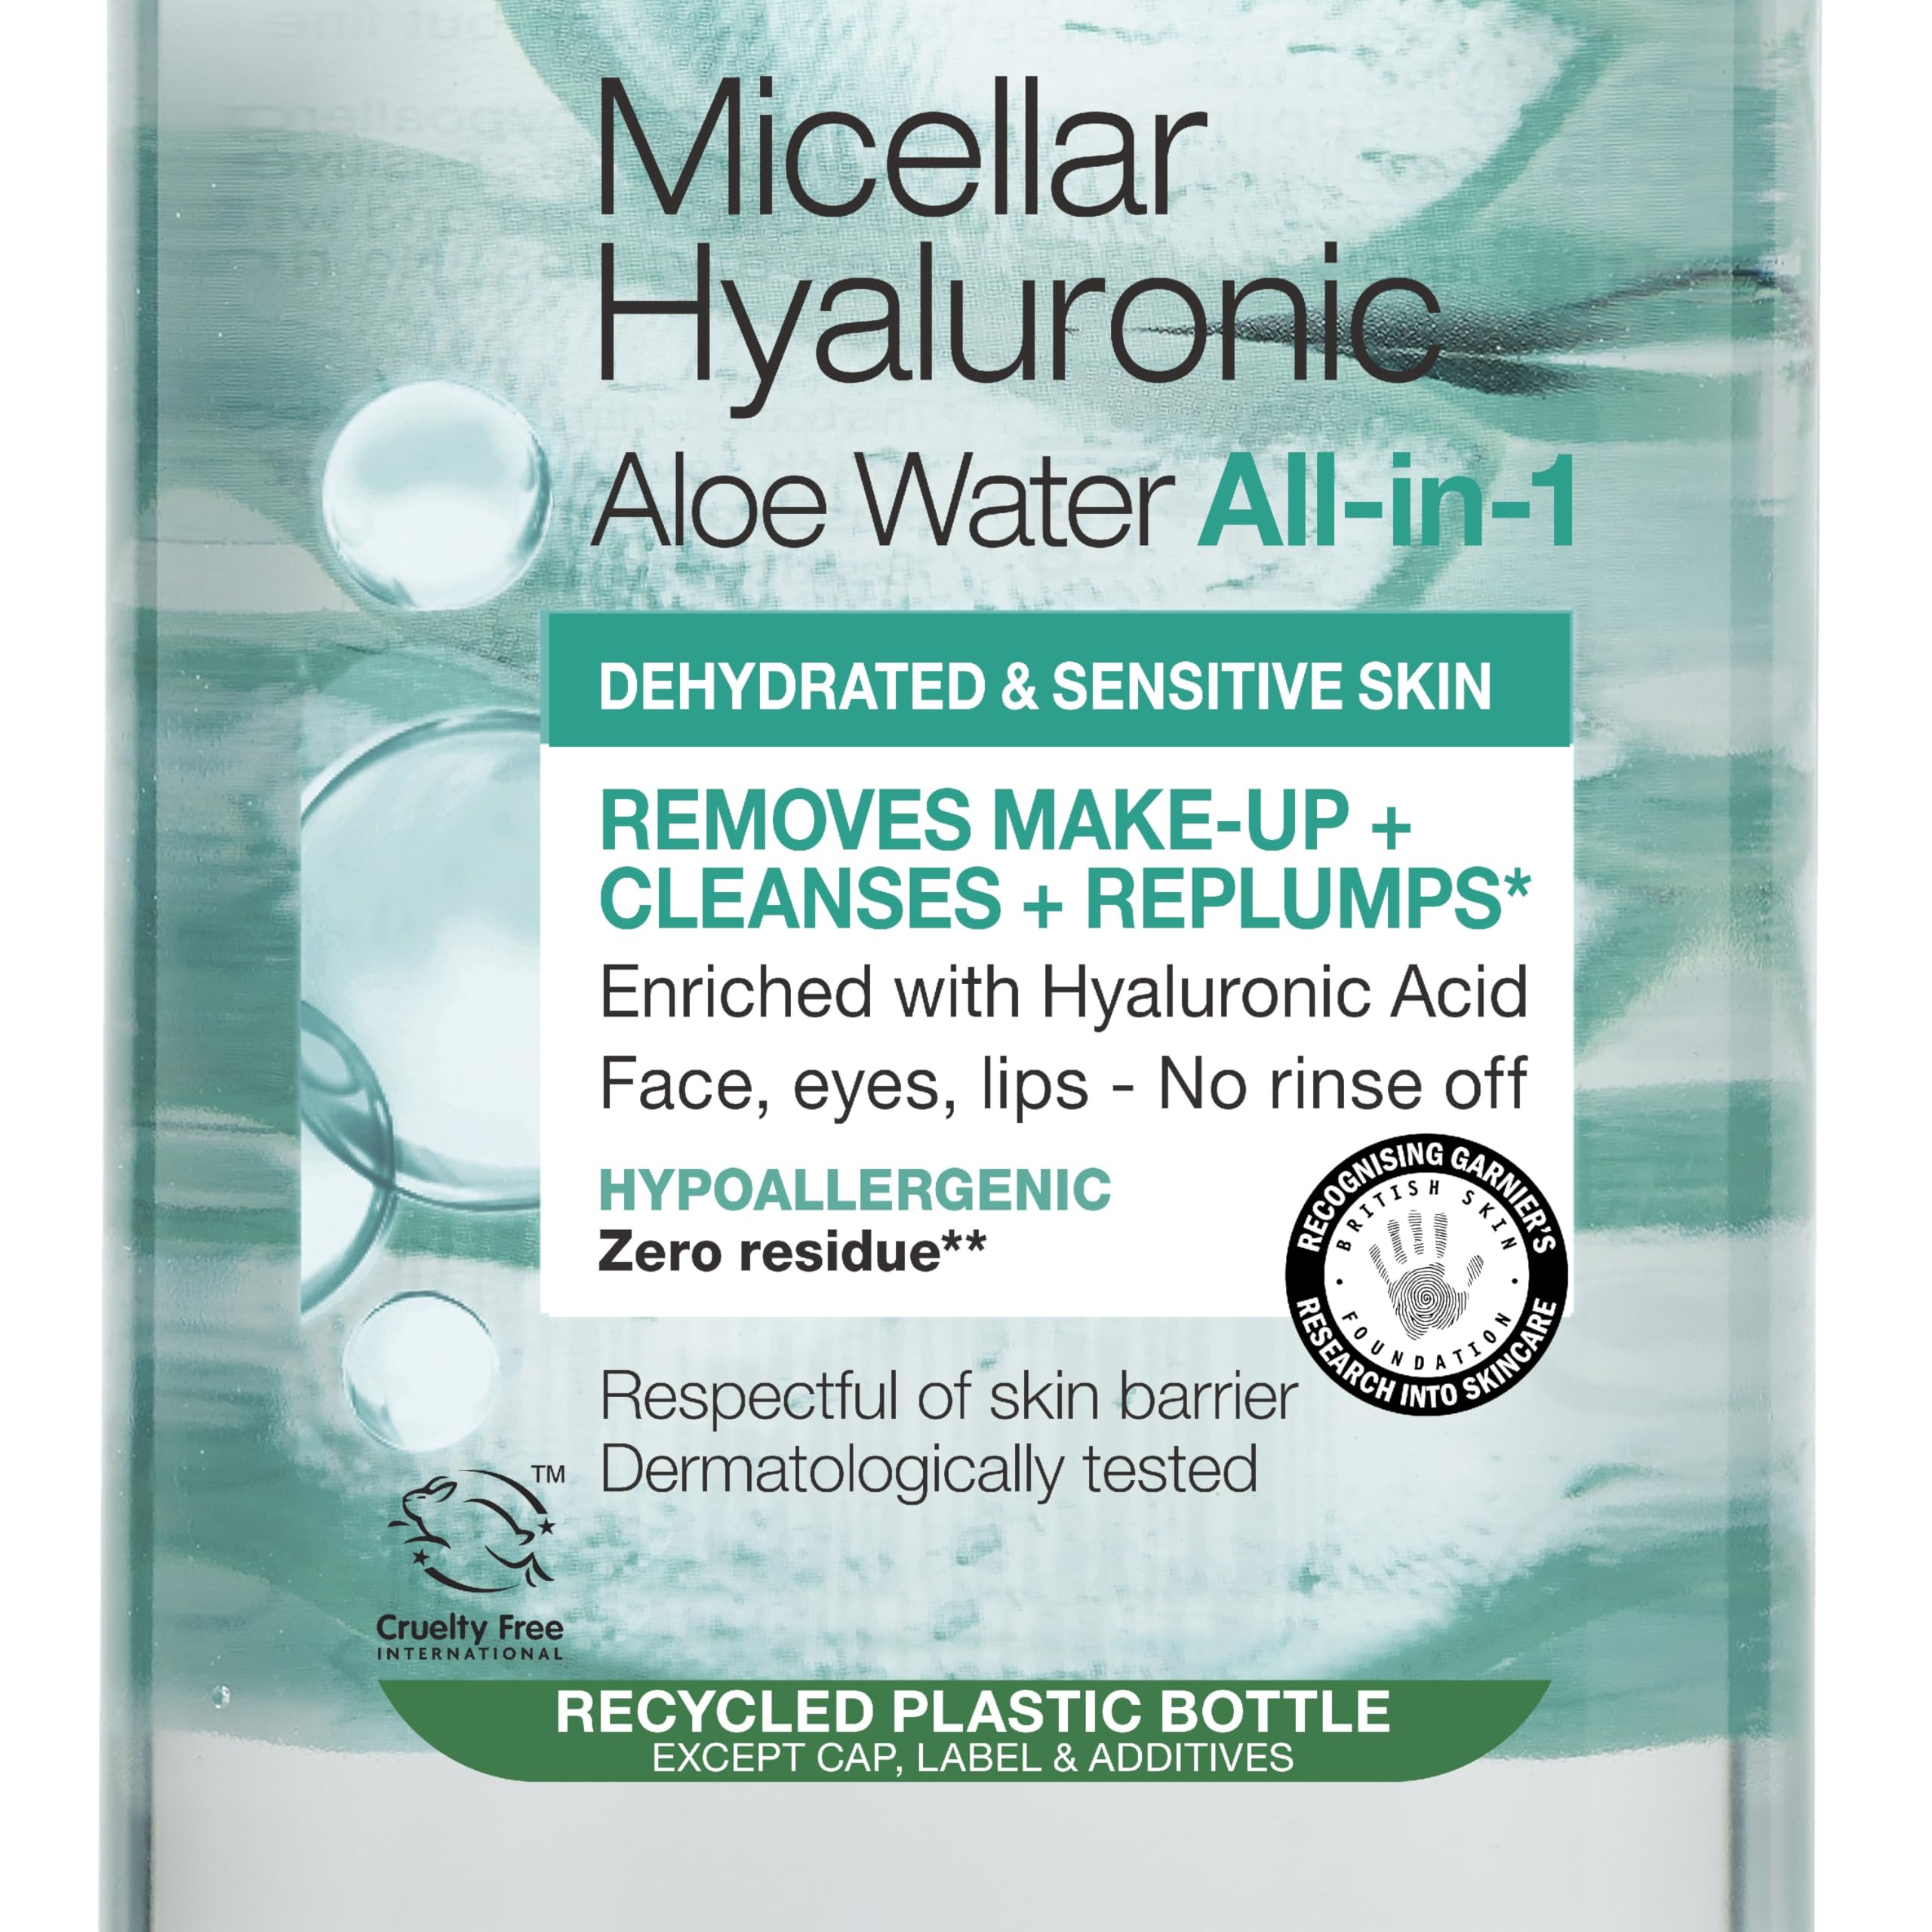 Garnier Micellar Hyaluronic Aloe Cleansing Water For Dehydrated Skin 400ml, Replumping Cleanser & Makeup Remover, Recognised By The British Skin Foundation, Use With Reusable Micellar Eco Pads